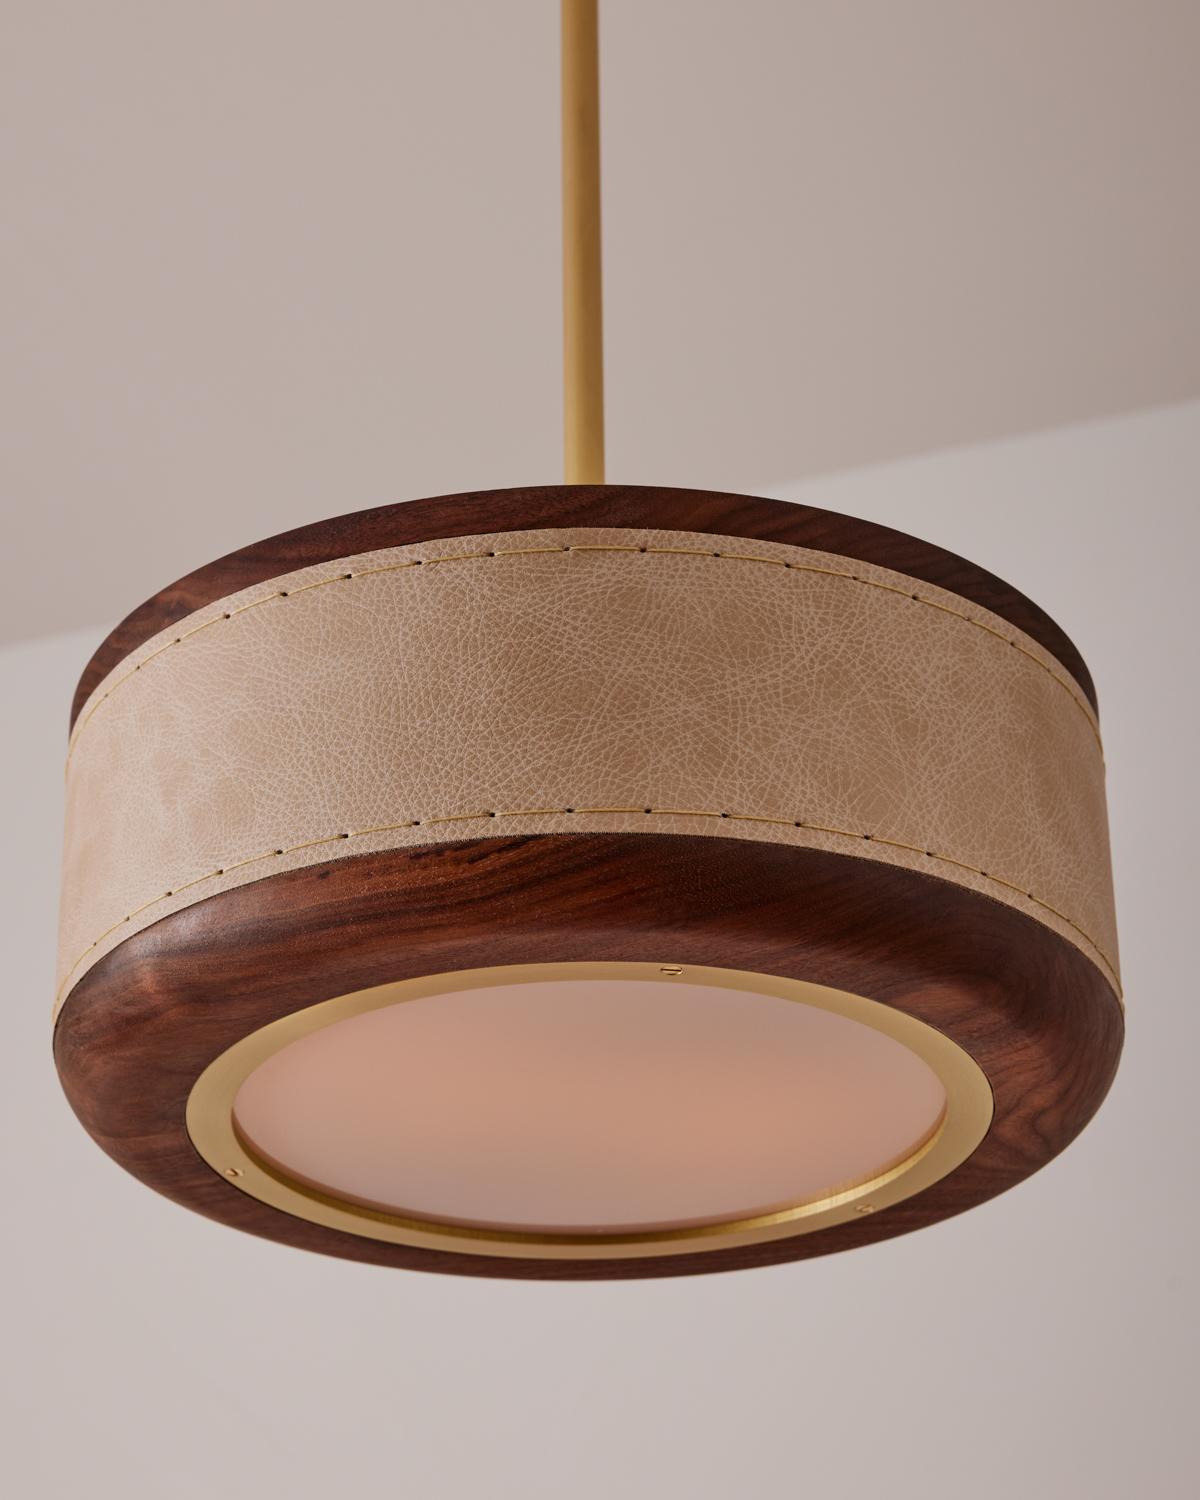 Hand-Crafted Nura Ceiling Fixture - 12